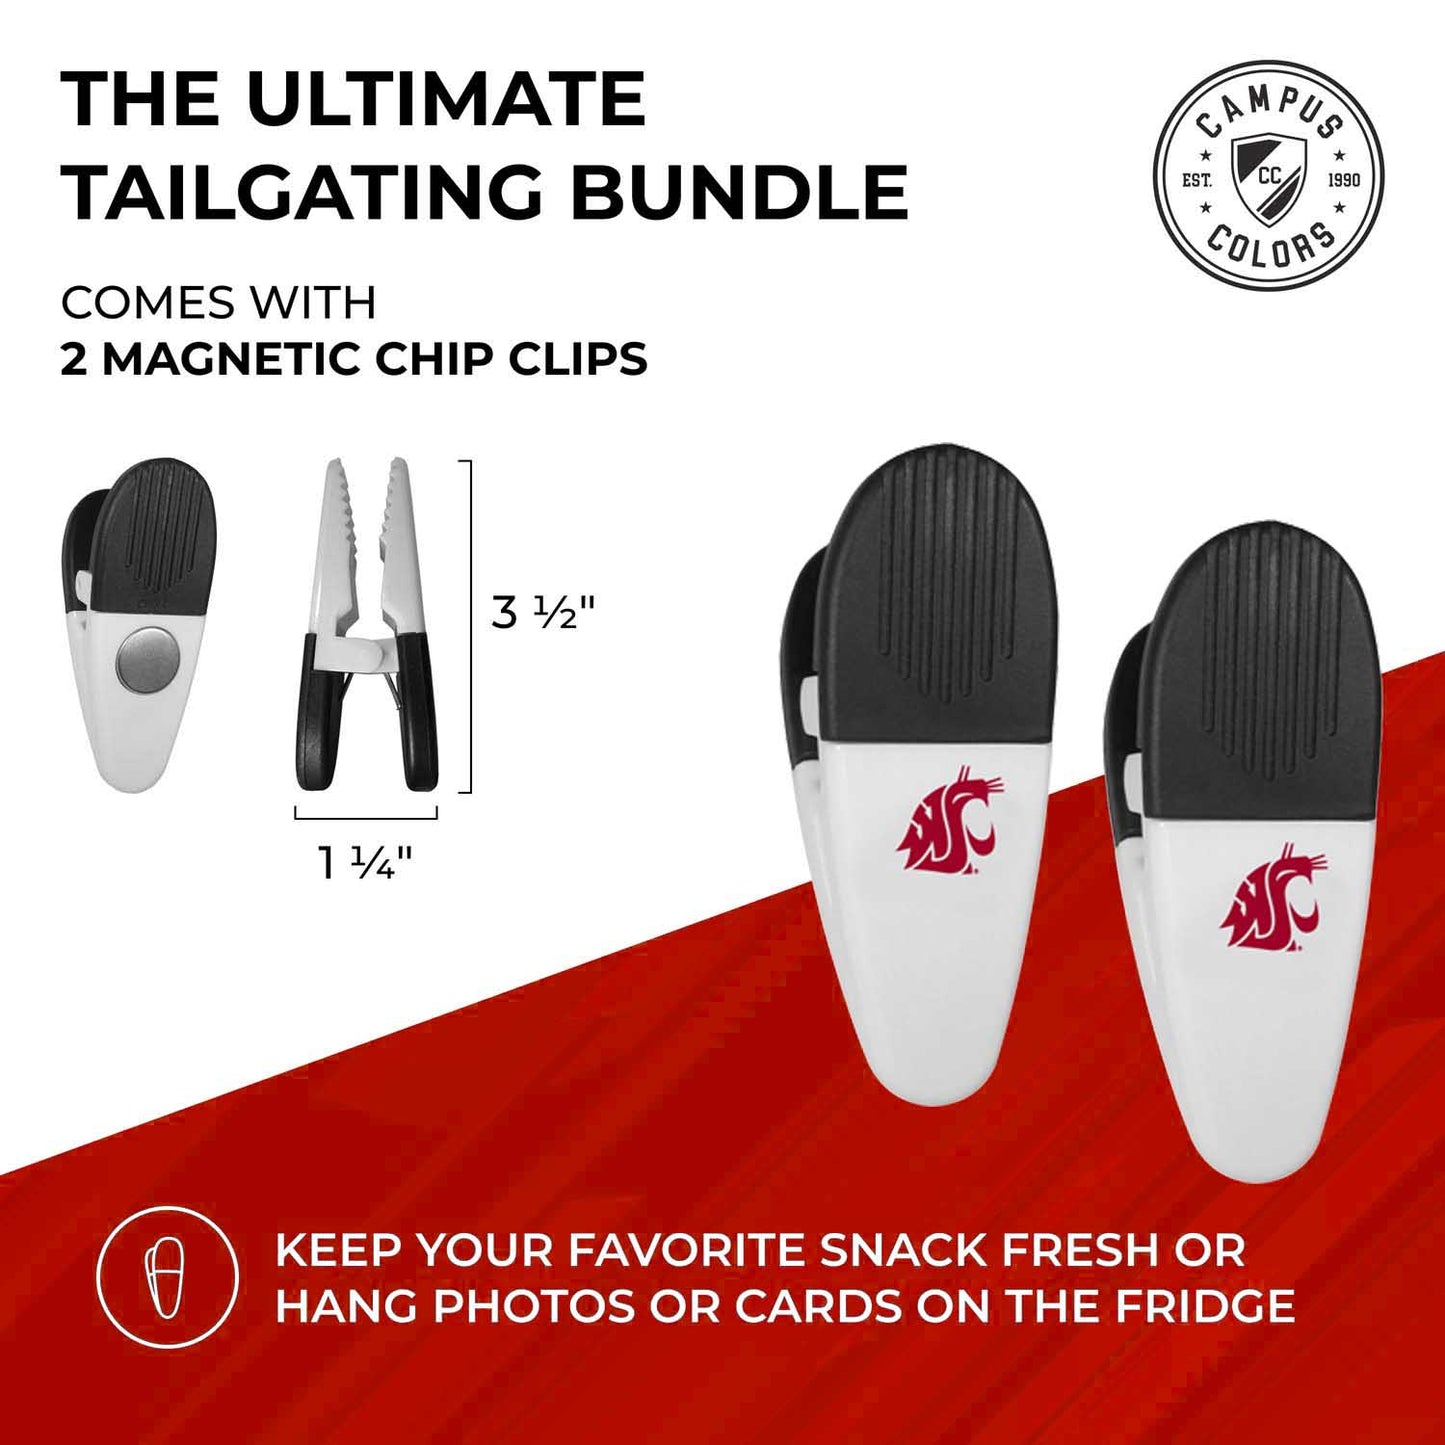 Washington State Cougars Collegiate University Two Piece Grilling Tools Set with 2 Magnet Chip Clips - Chrome